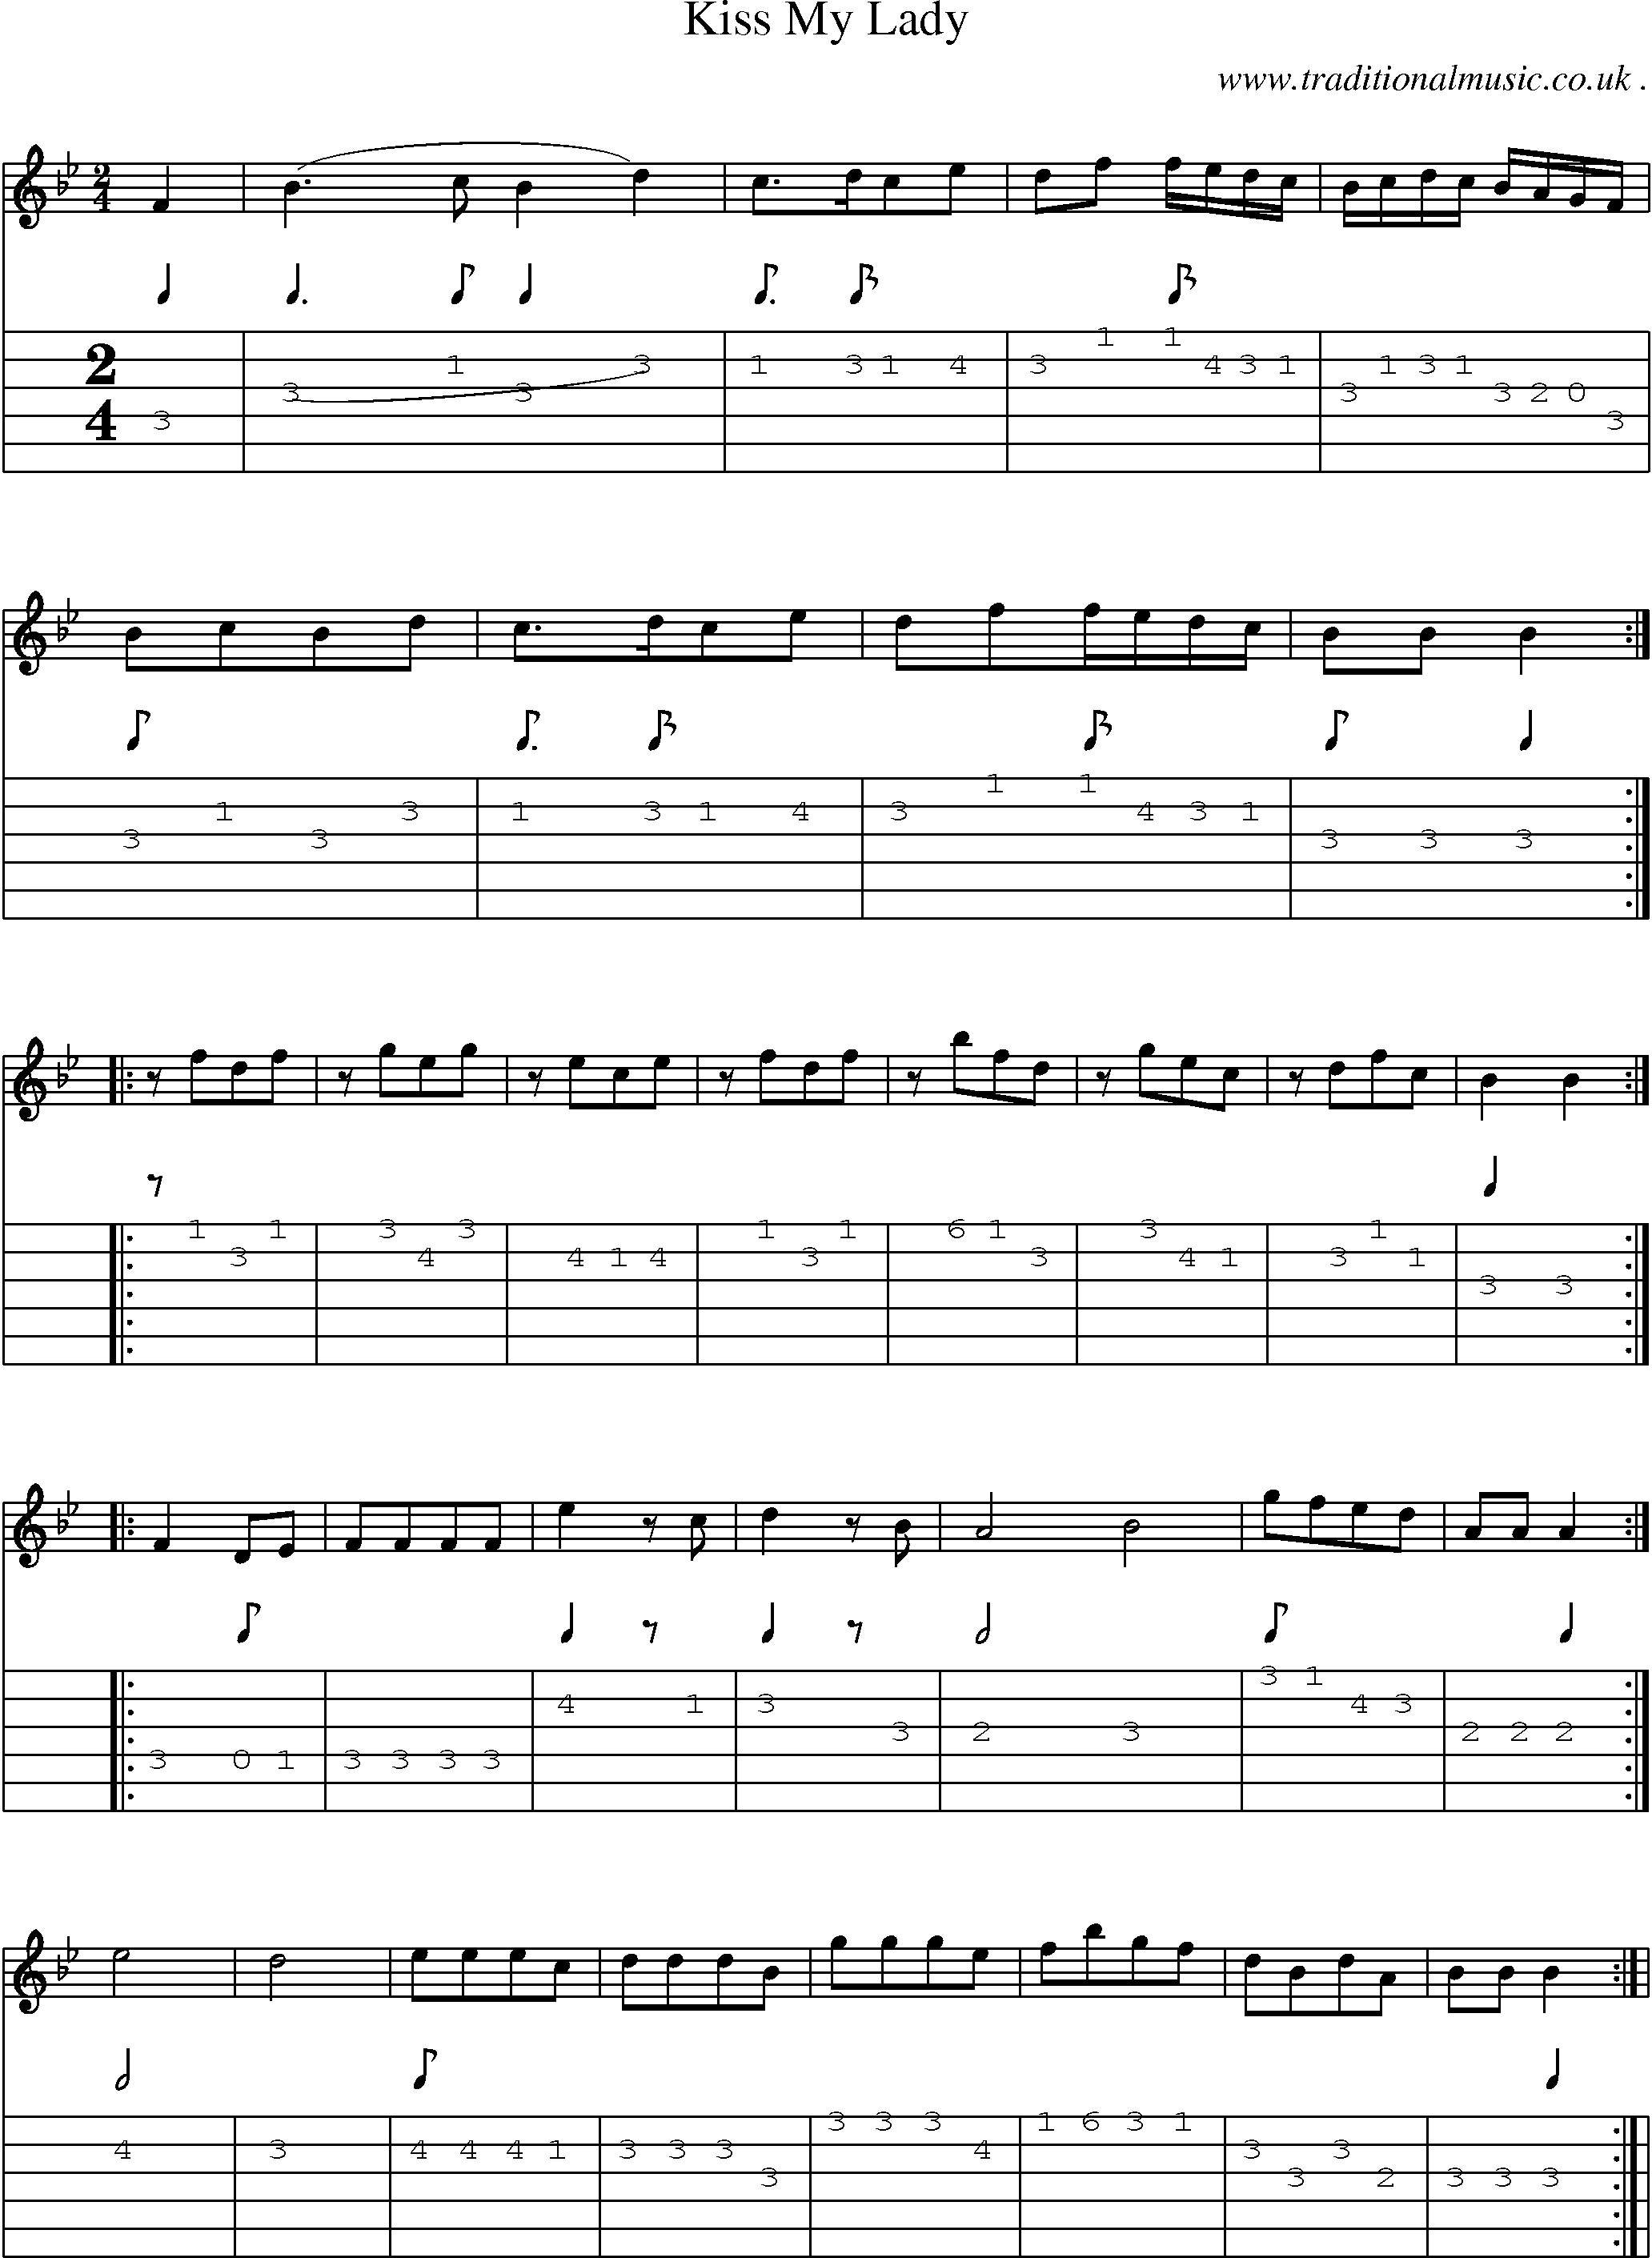 Sheet-Music and Guitar Tabs for Kiss My Lady